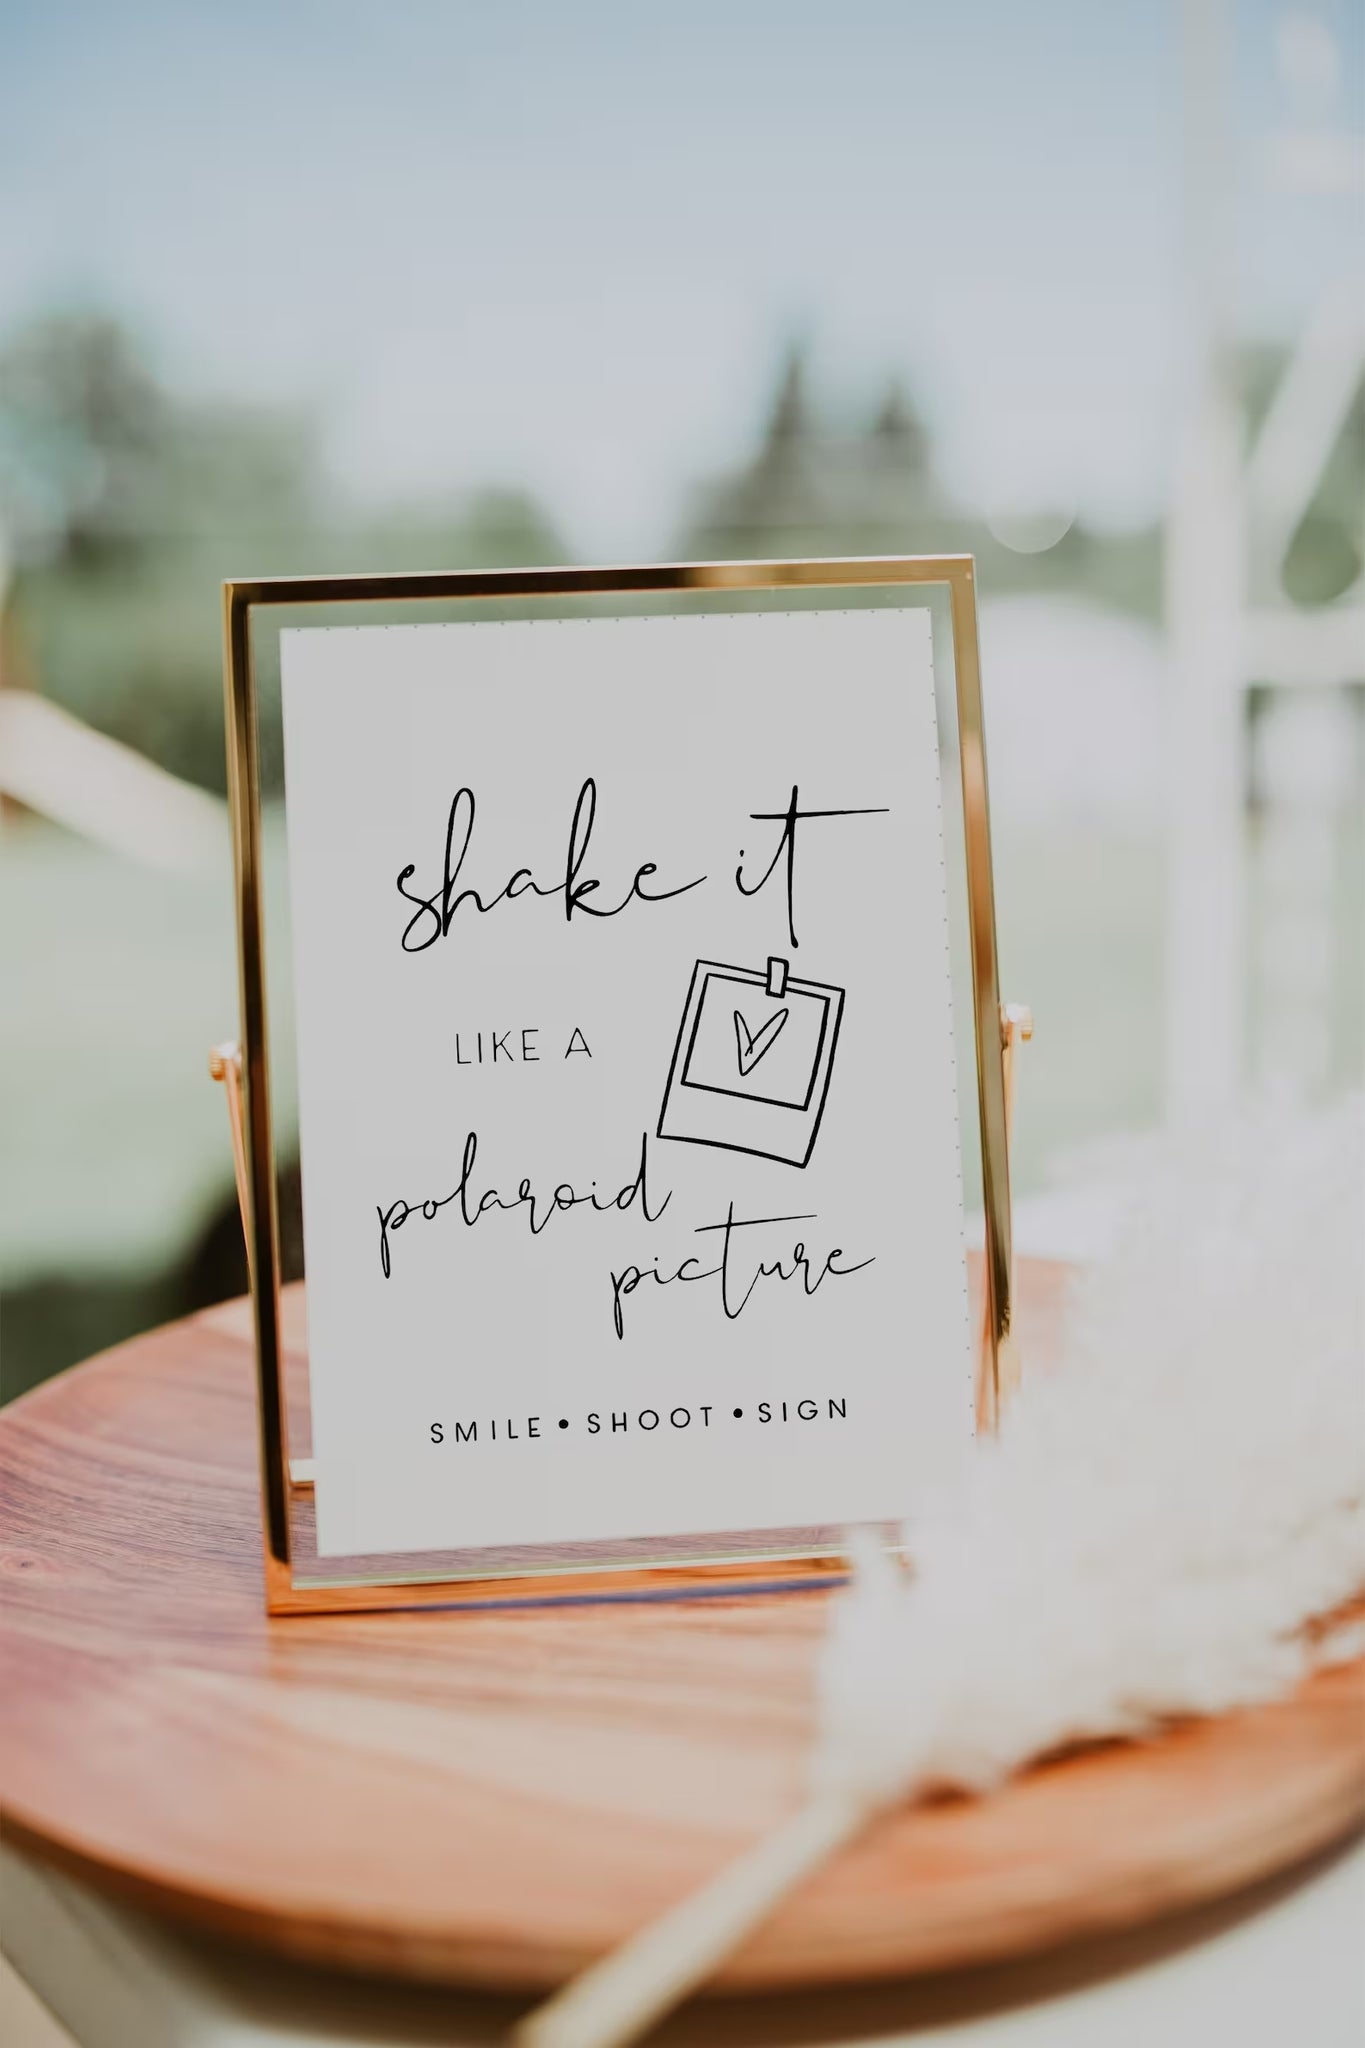 Shake It Like A Polaroid Picture Photo Guest Book Sign